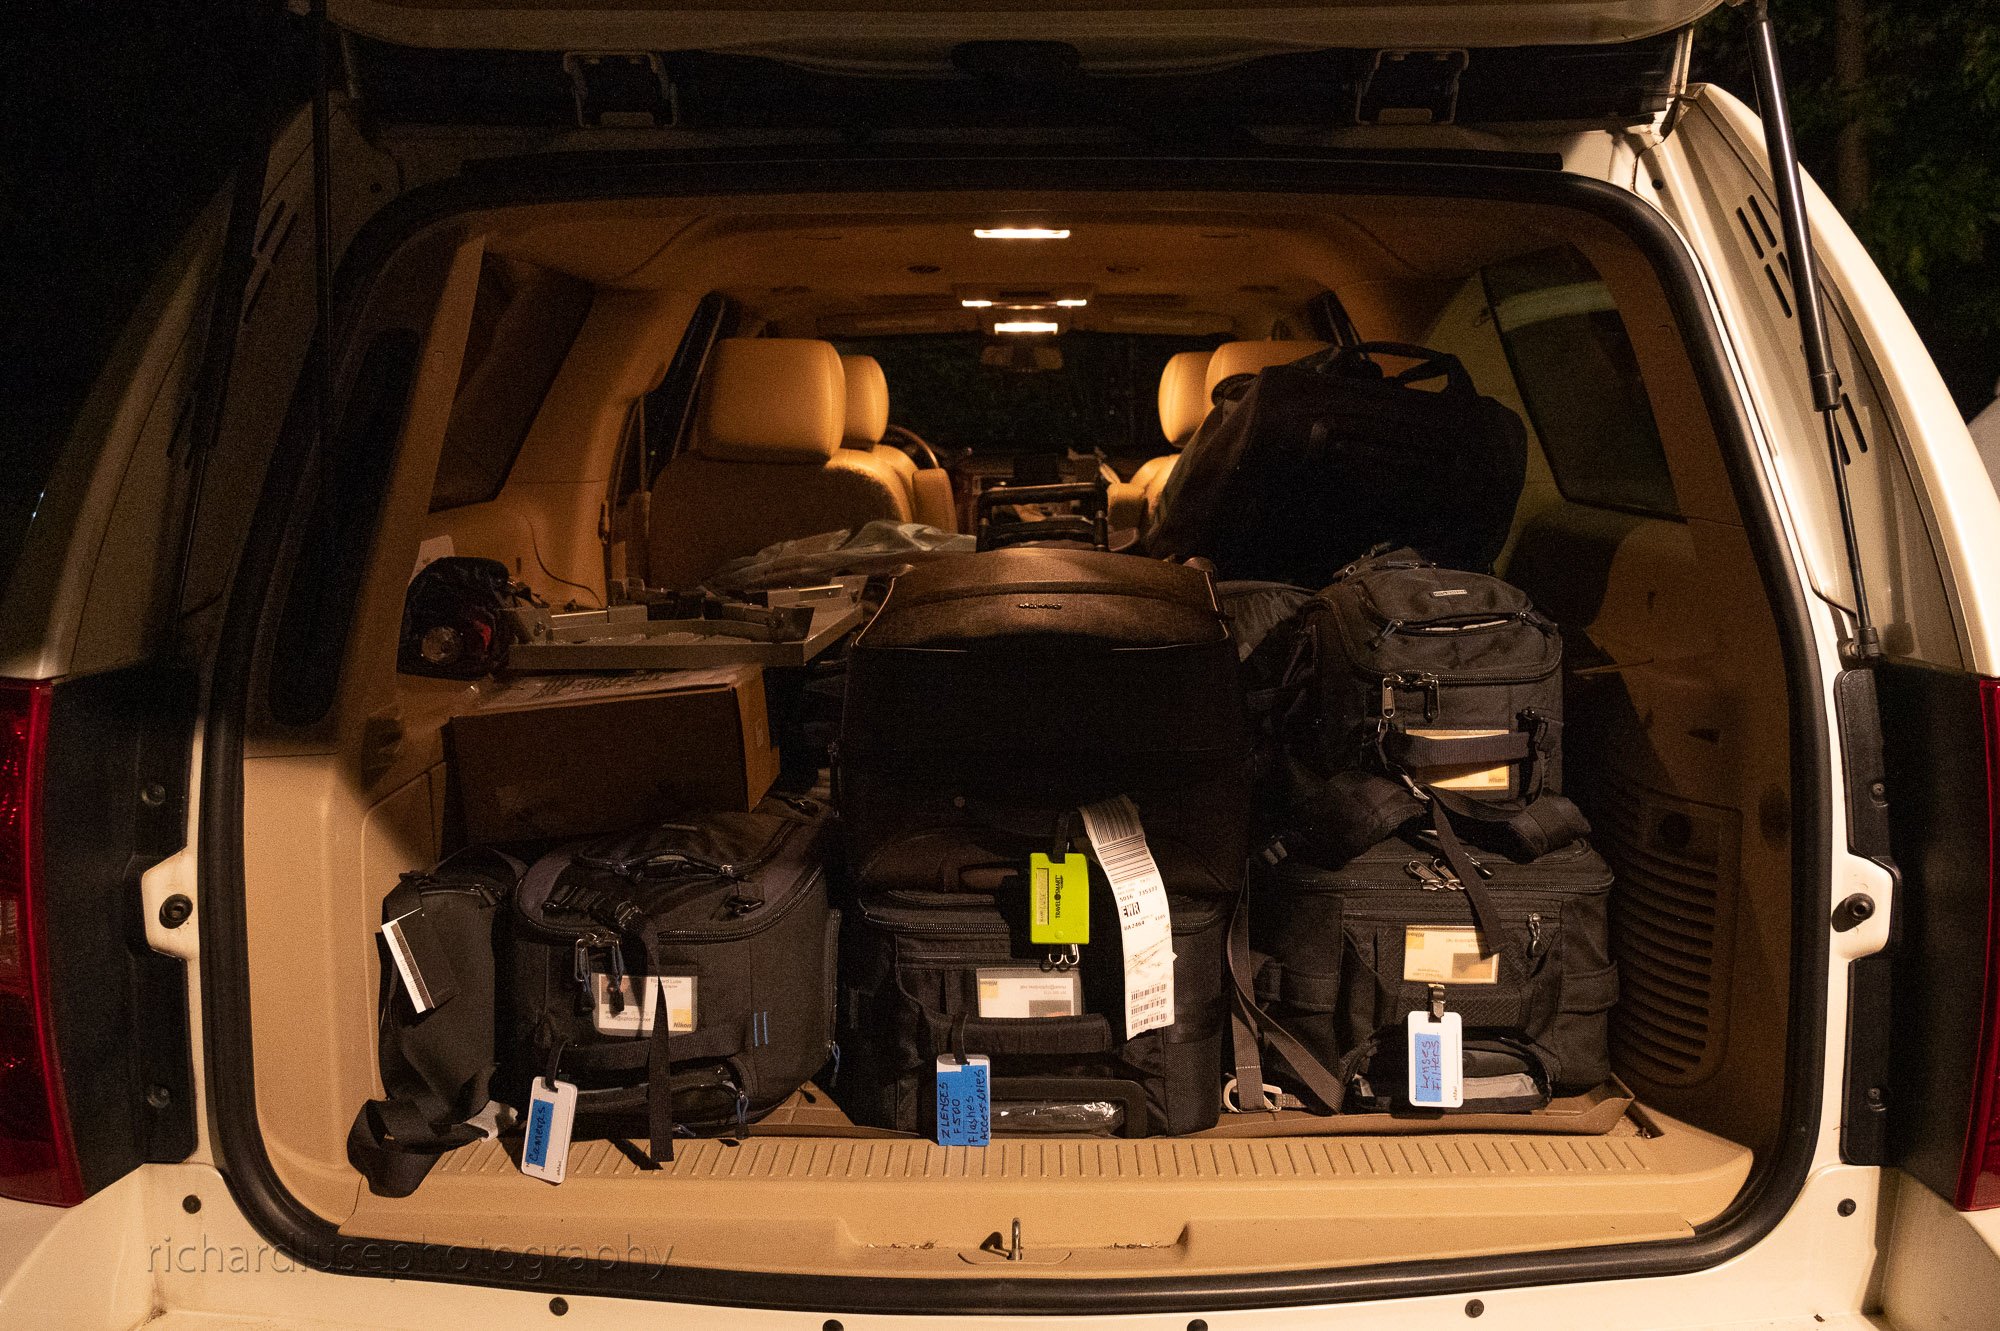 Gear packed and ready to roll.